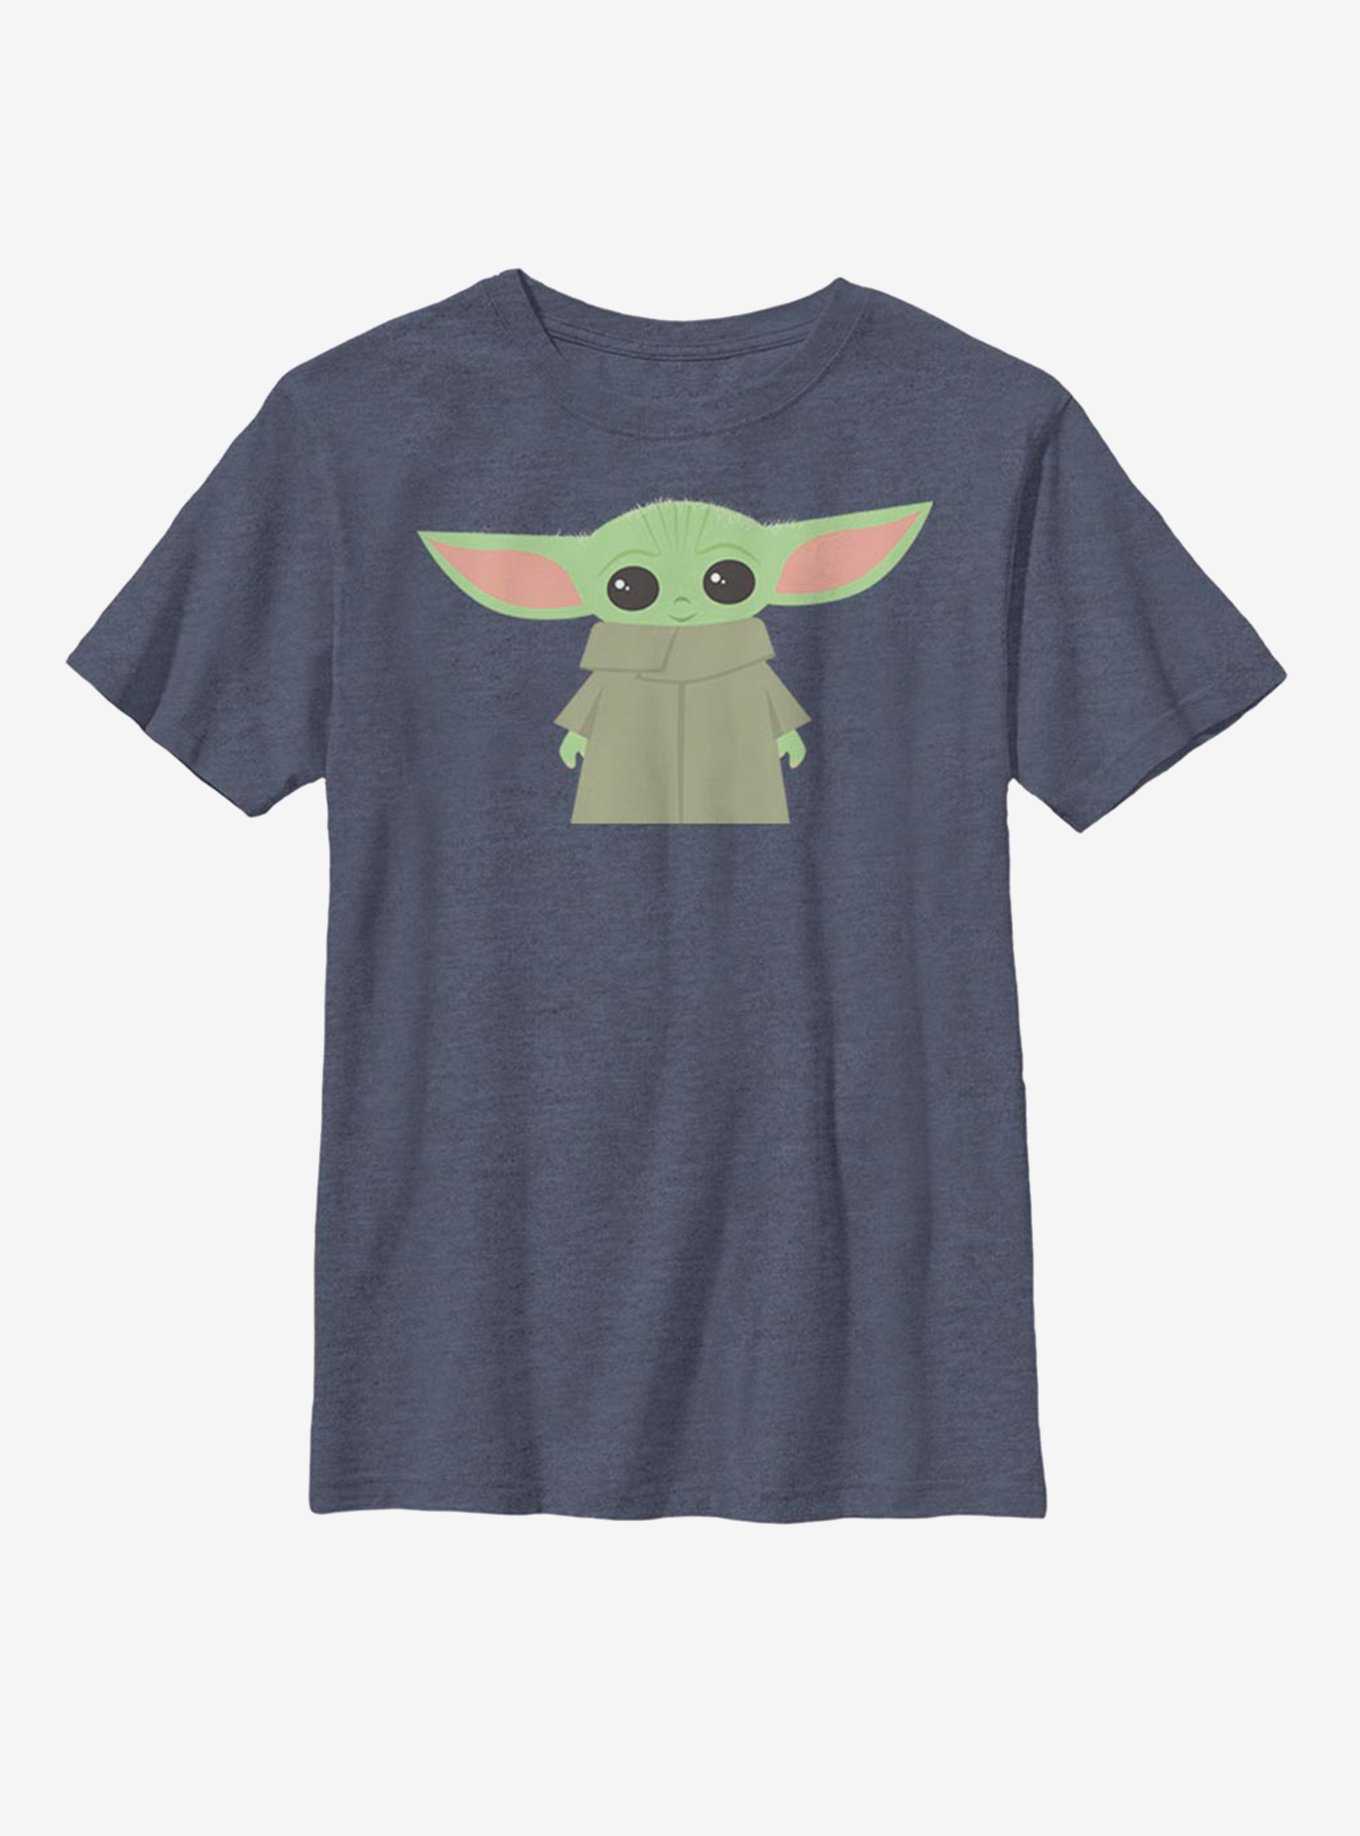 Star Wars The Mandalorian The Child Simple And Cute Youth T-Shirt, , hi-res